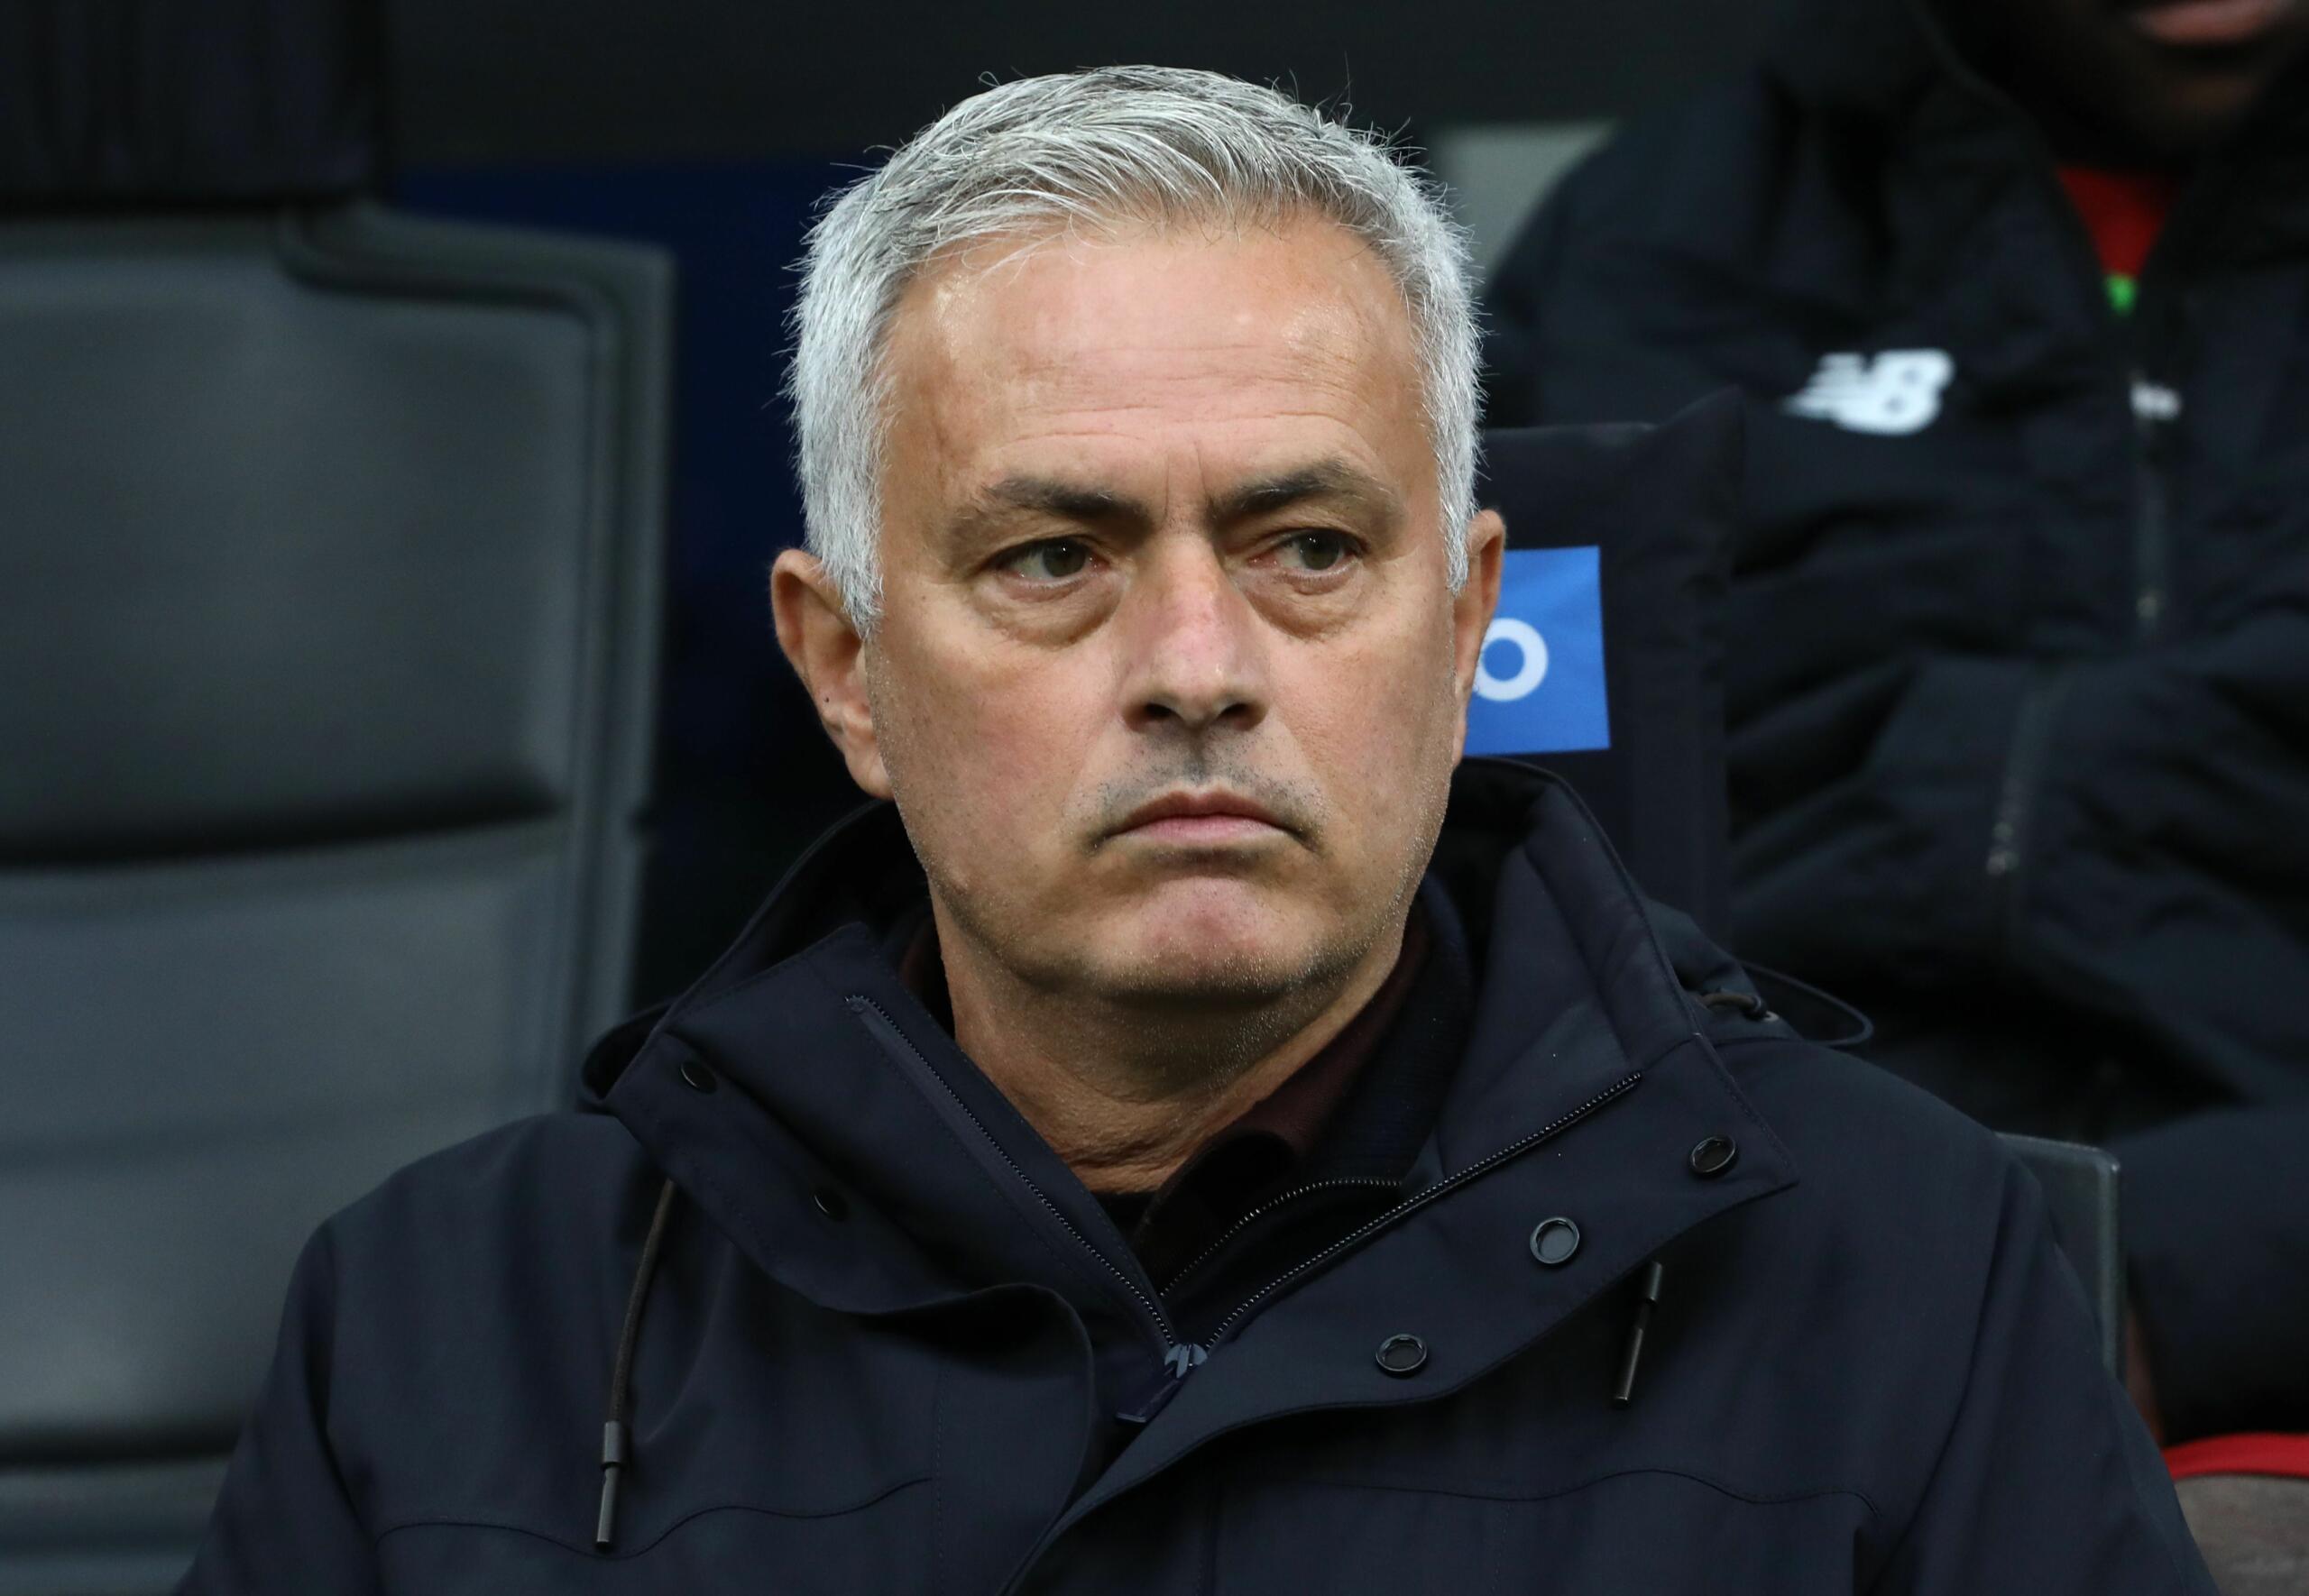 Fresh off his Roma dismissal, José Mourinho has turned down the advances from Al Shabab, at least for the time being, as he’d like to take over Napoli.